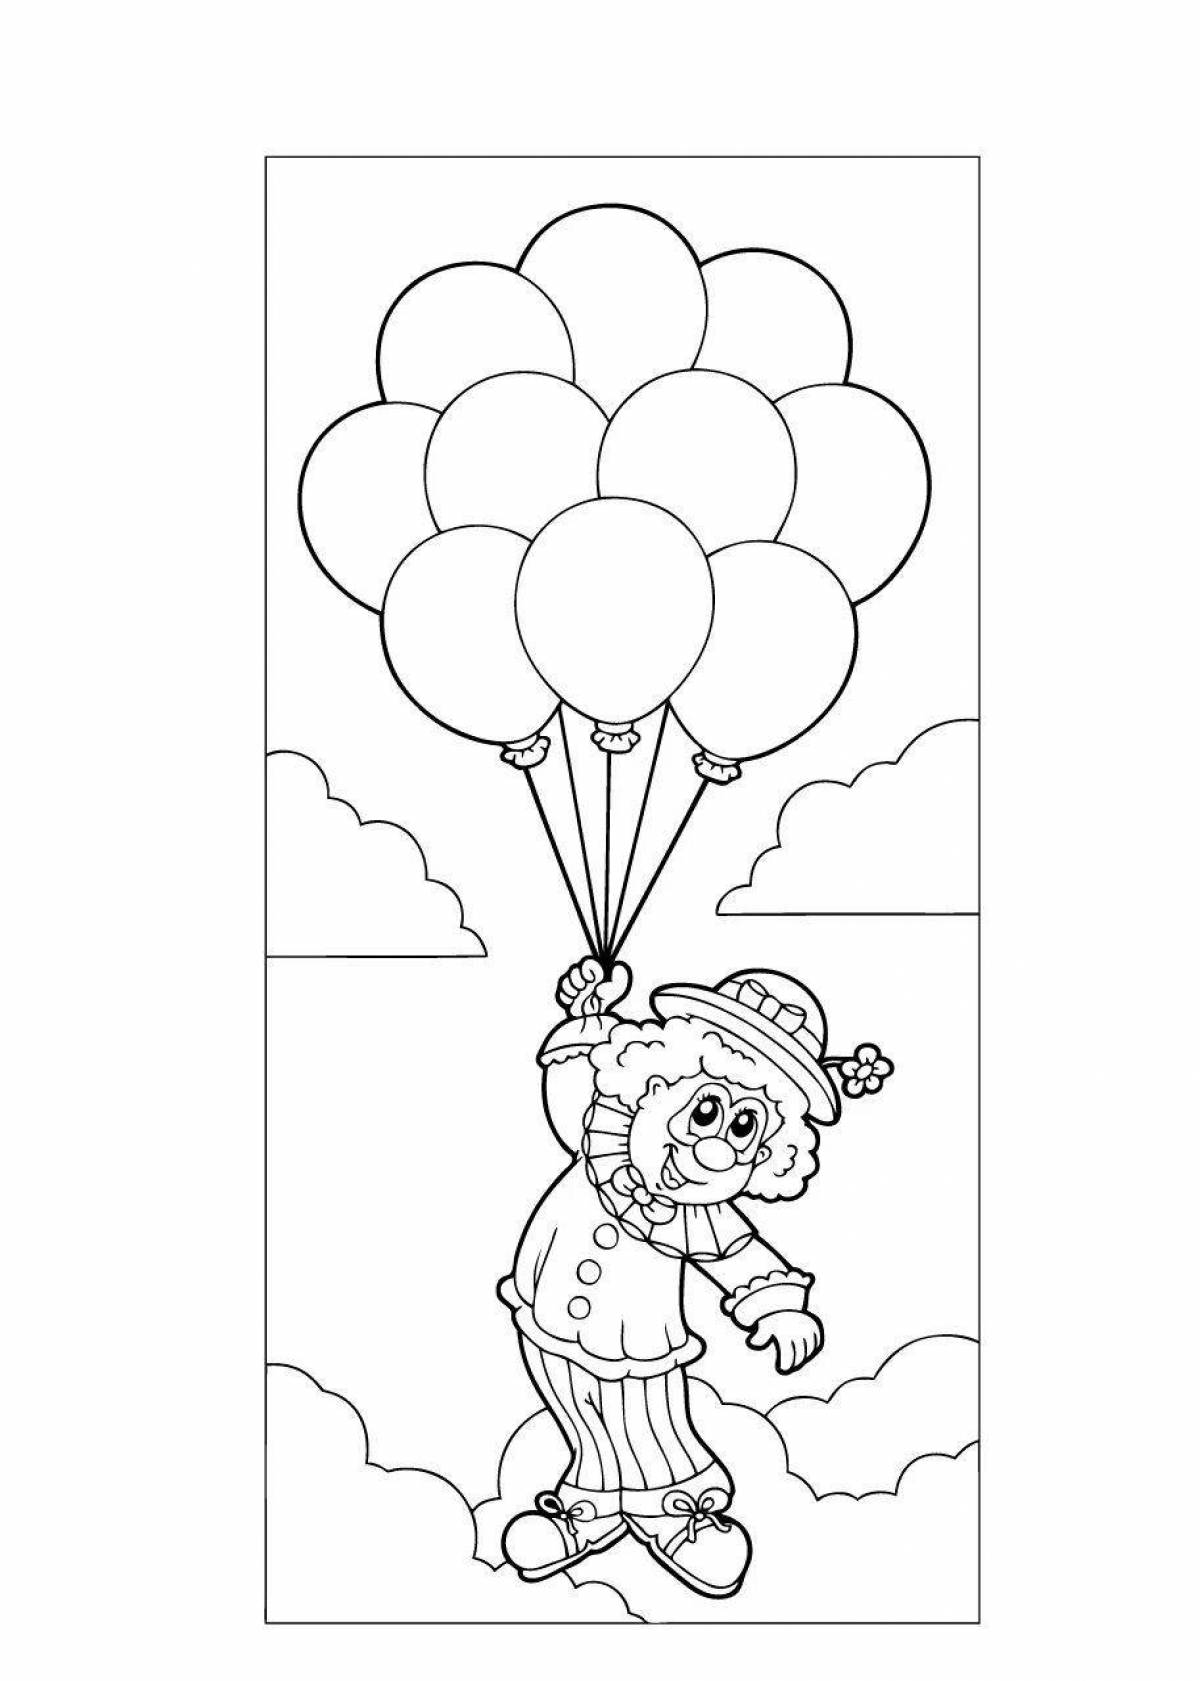 Jolly clown with balloons